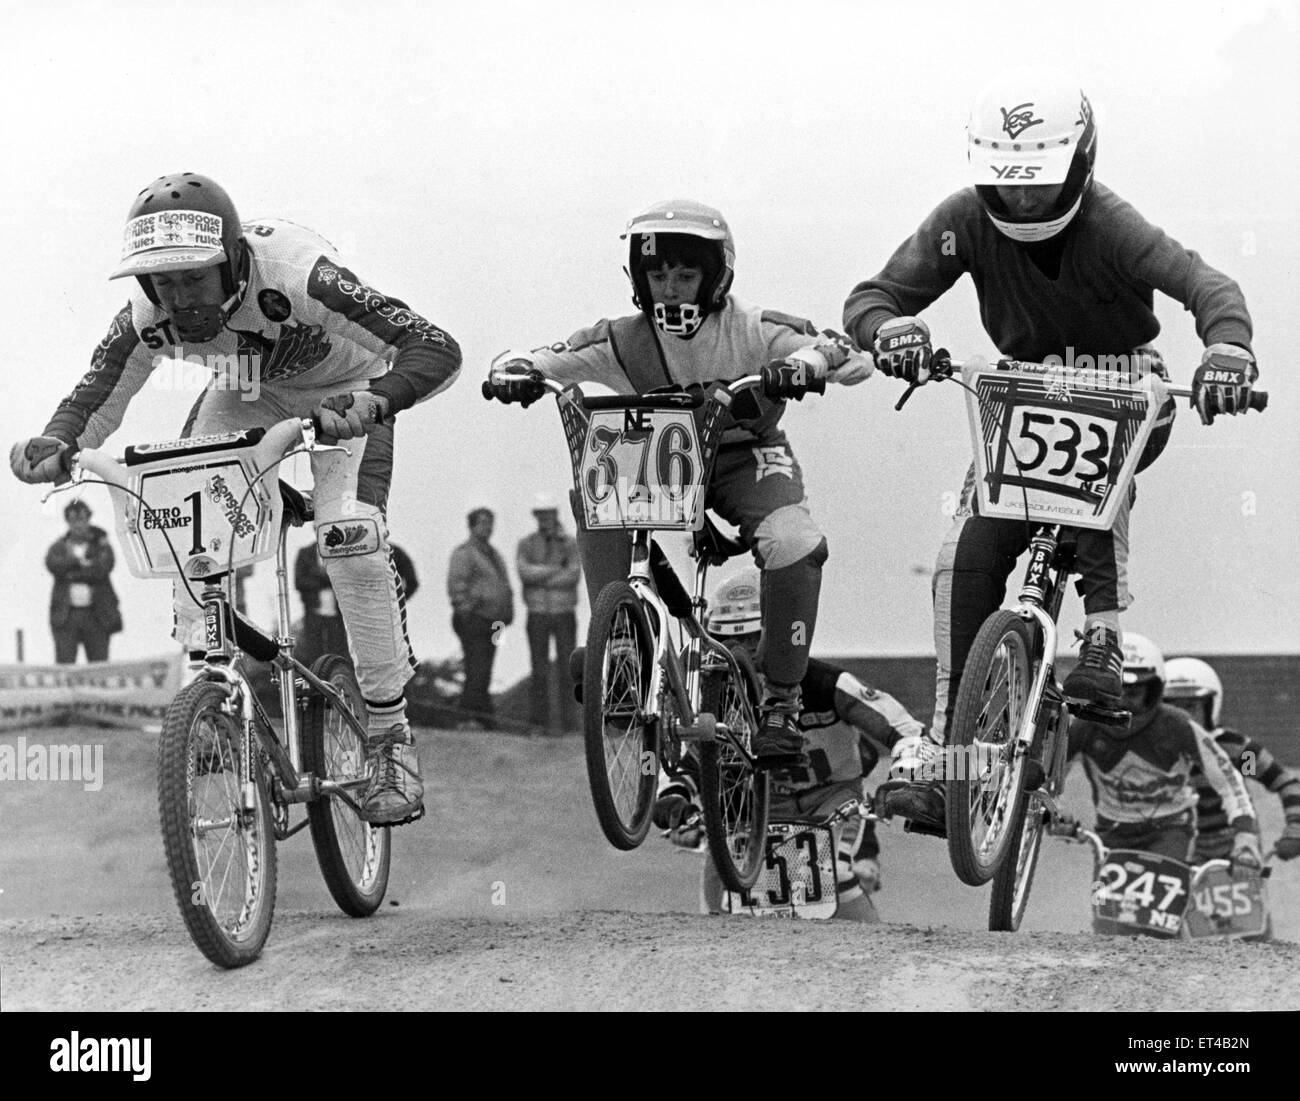 13 year old section of a BMX competition in Teesside, Steve Greaves (No 1)  on the left, leads a posse of riders. 27th July 1985 Stock Photo - Alamy